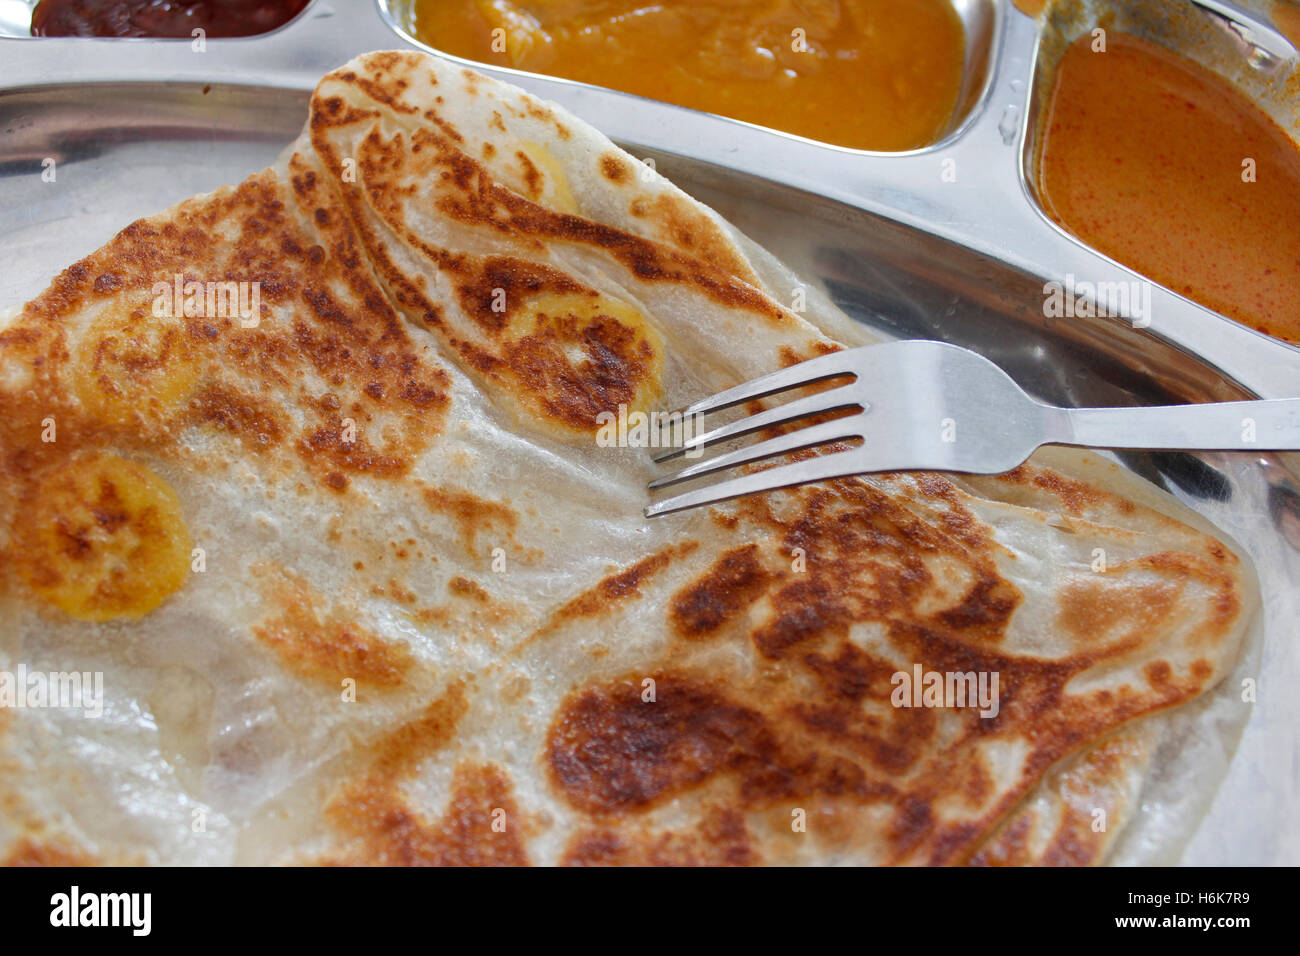 Roti canai or pan fried flatbread consisting of dough, egg, ghee and banana with the three accompanying sauces Stock Photo